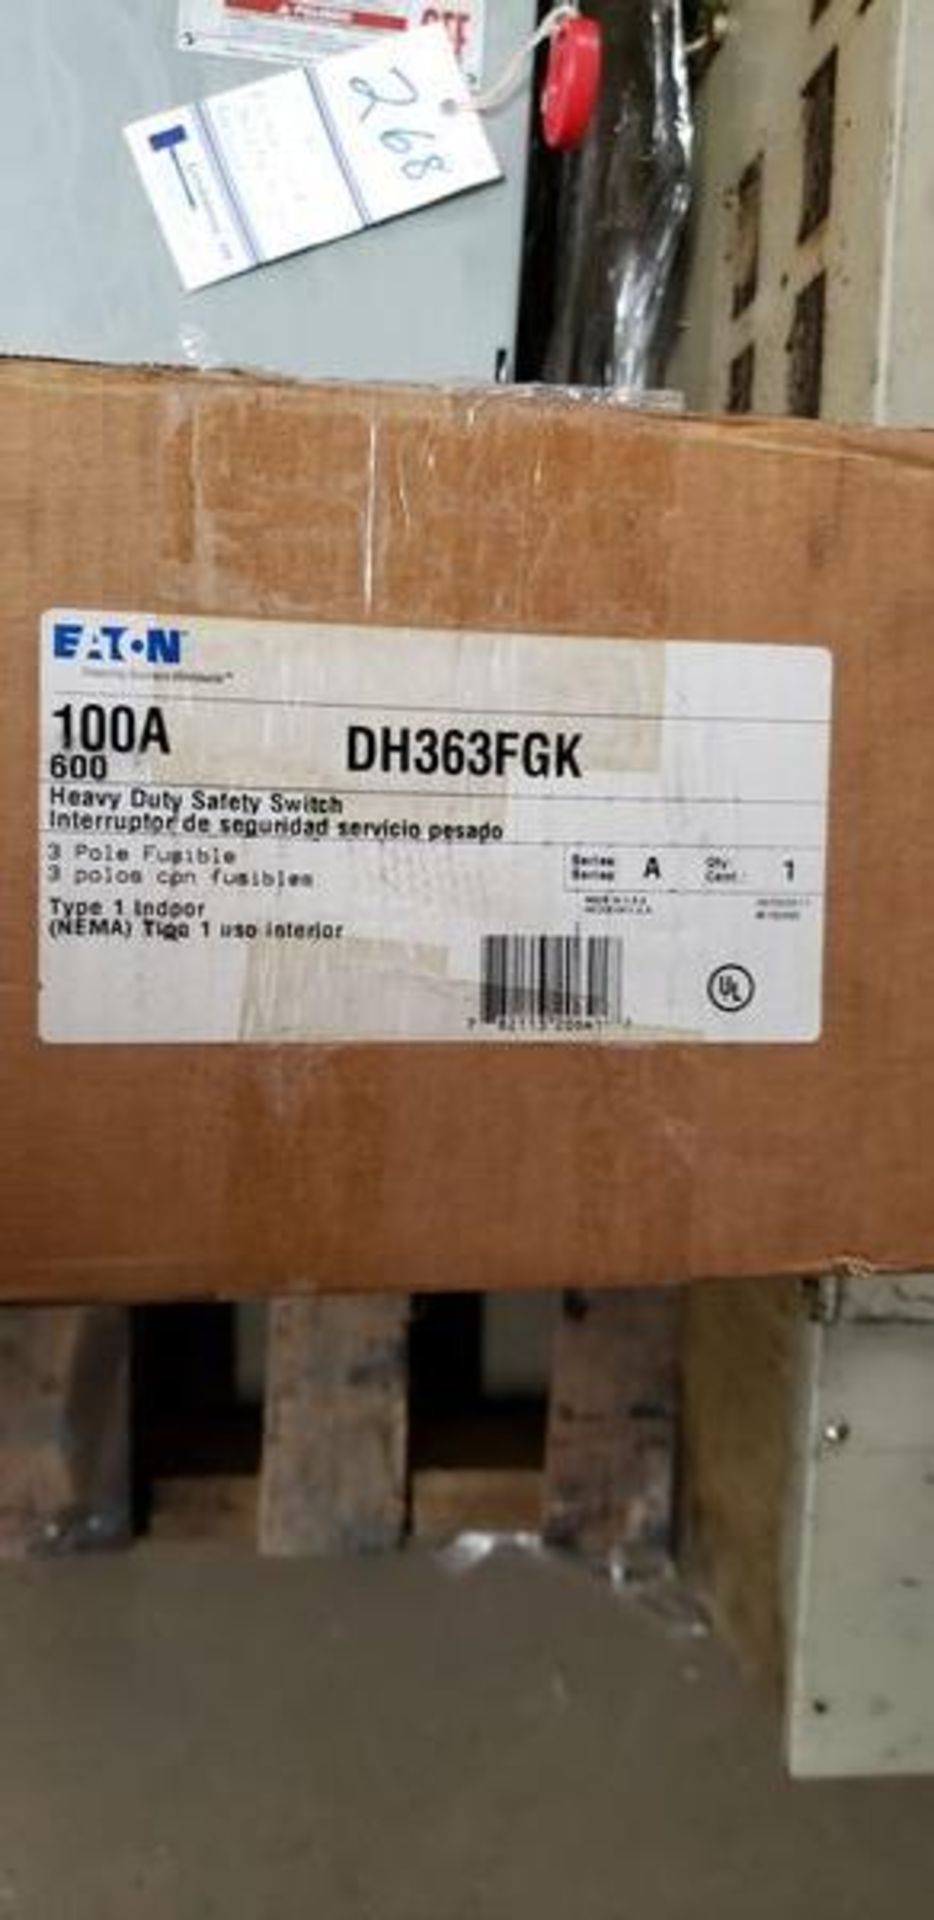 LOT OF 2 EATON 100A SAFETY SWITCHES DH363FGK - Image 4 of 4